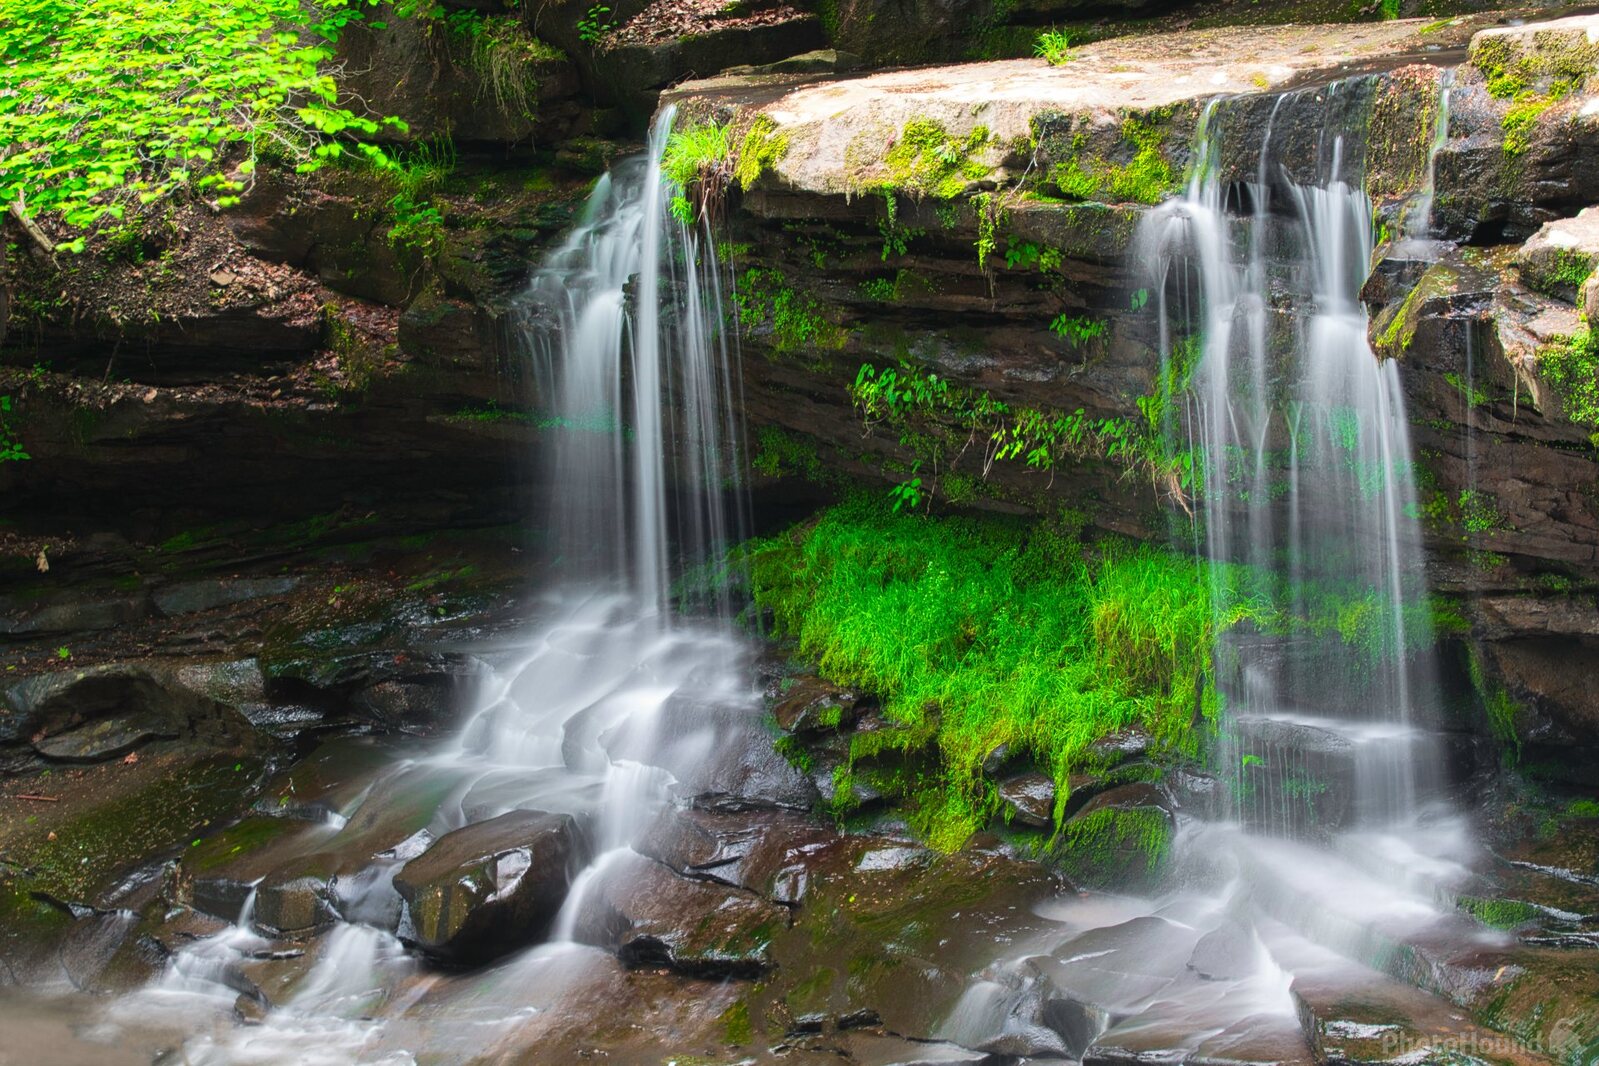 Image of Dunlop Falls by Andy Hammes